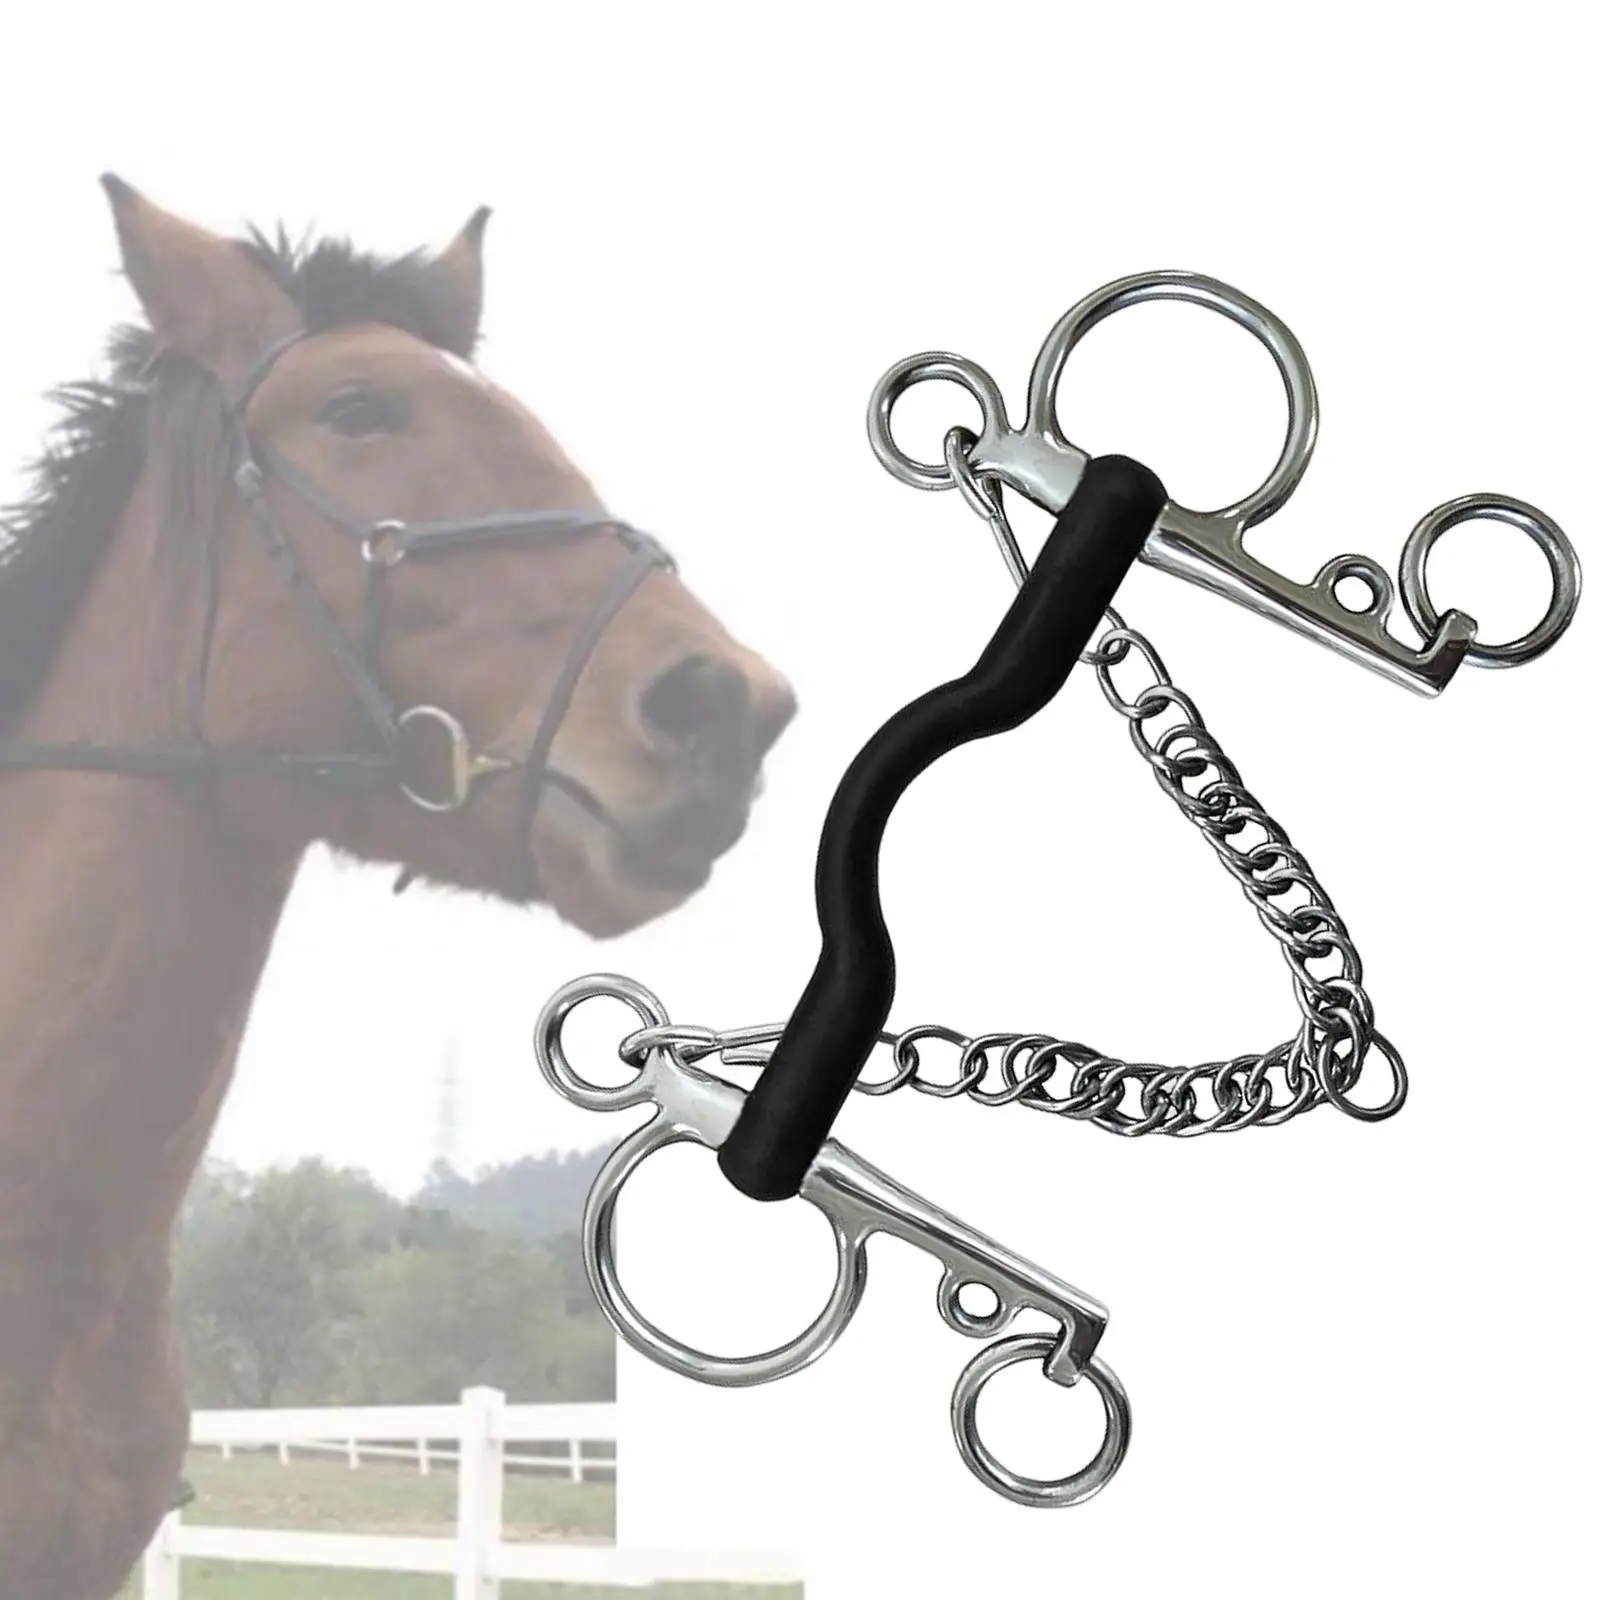 horse Bit, Stainless Steel, W/Curb Hooks Chain, with Silver Trims, Cheek Mouth for Performance Horse Bridle Training Equipment